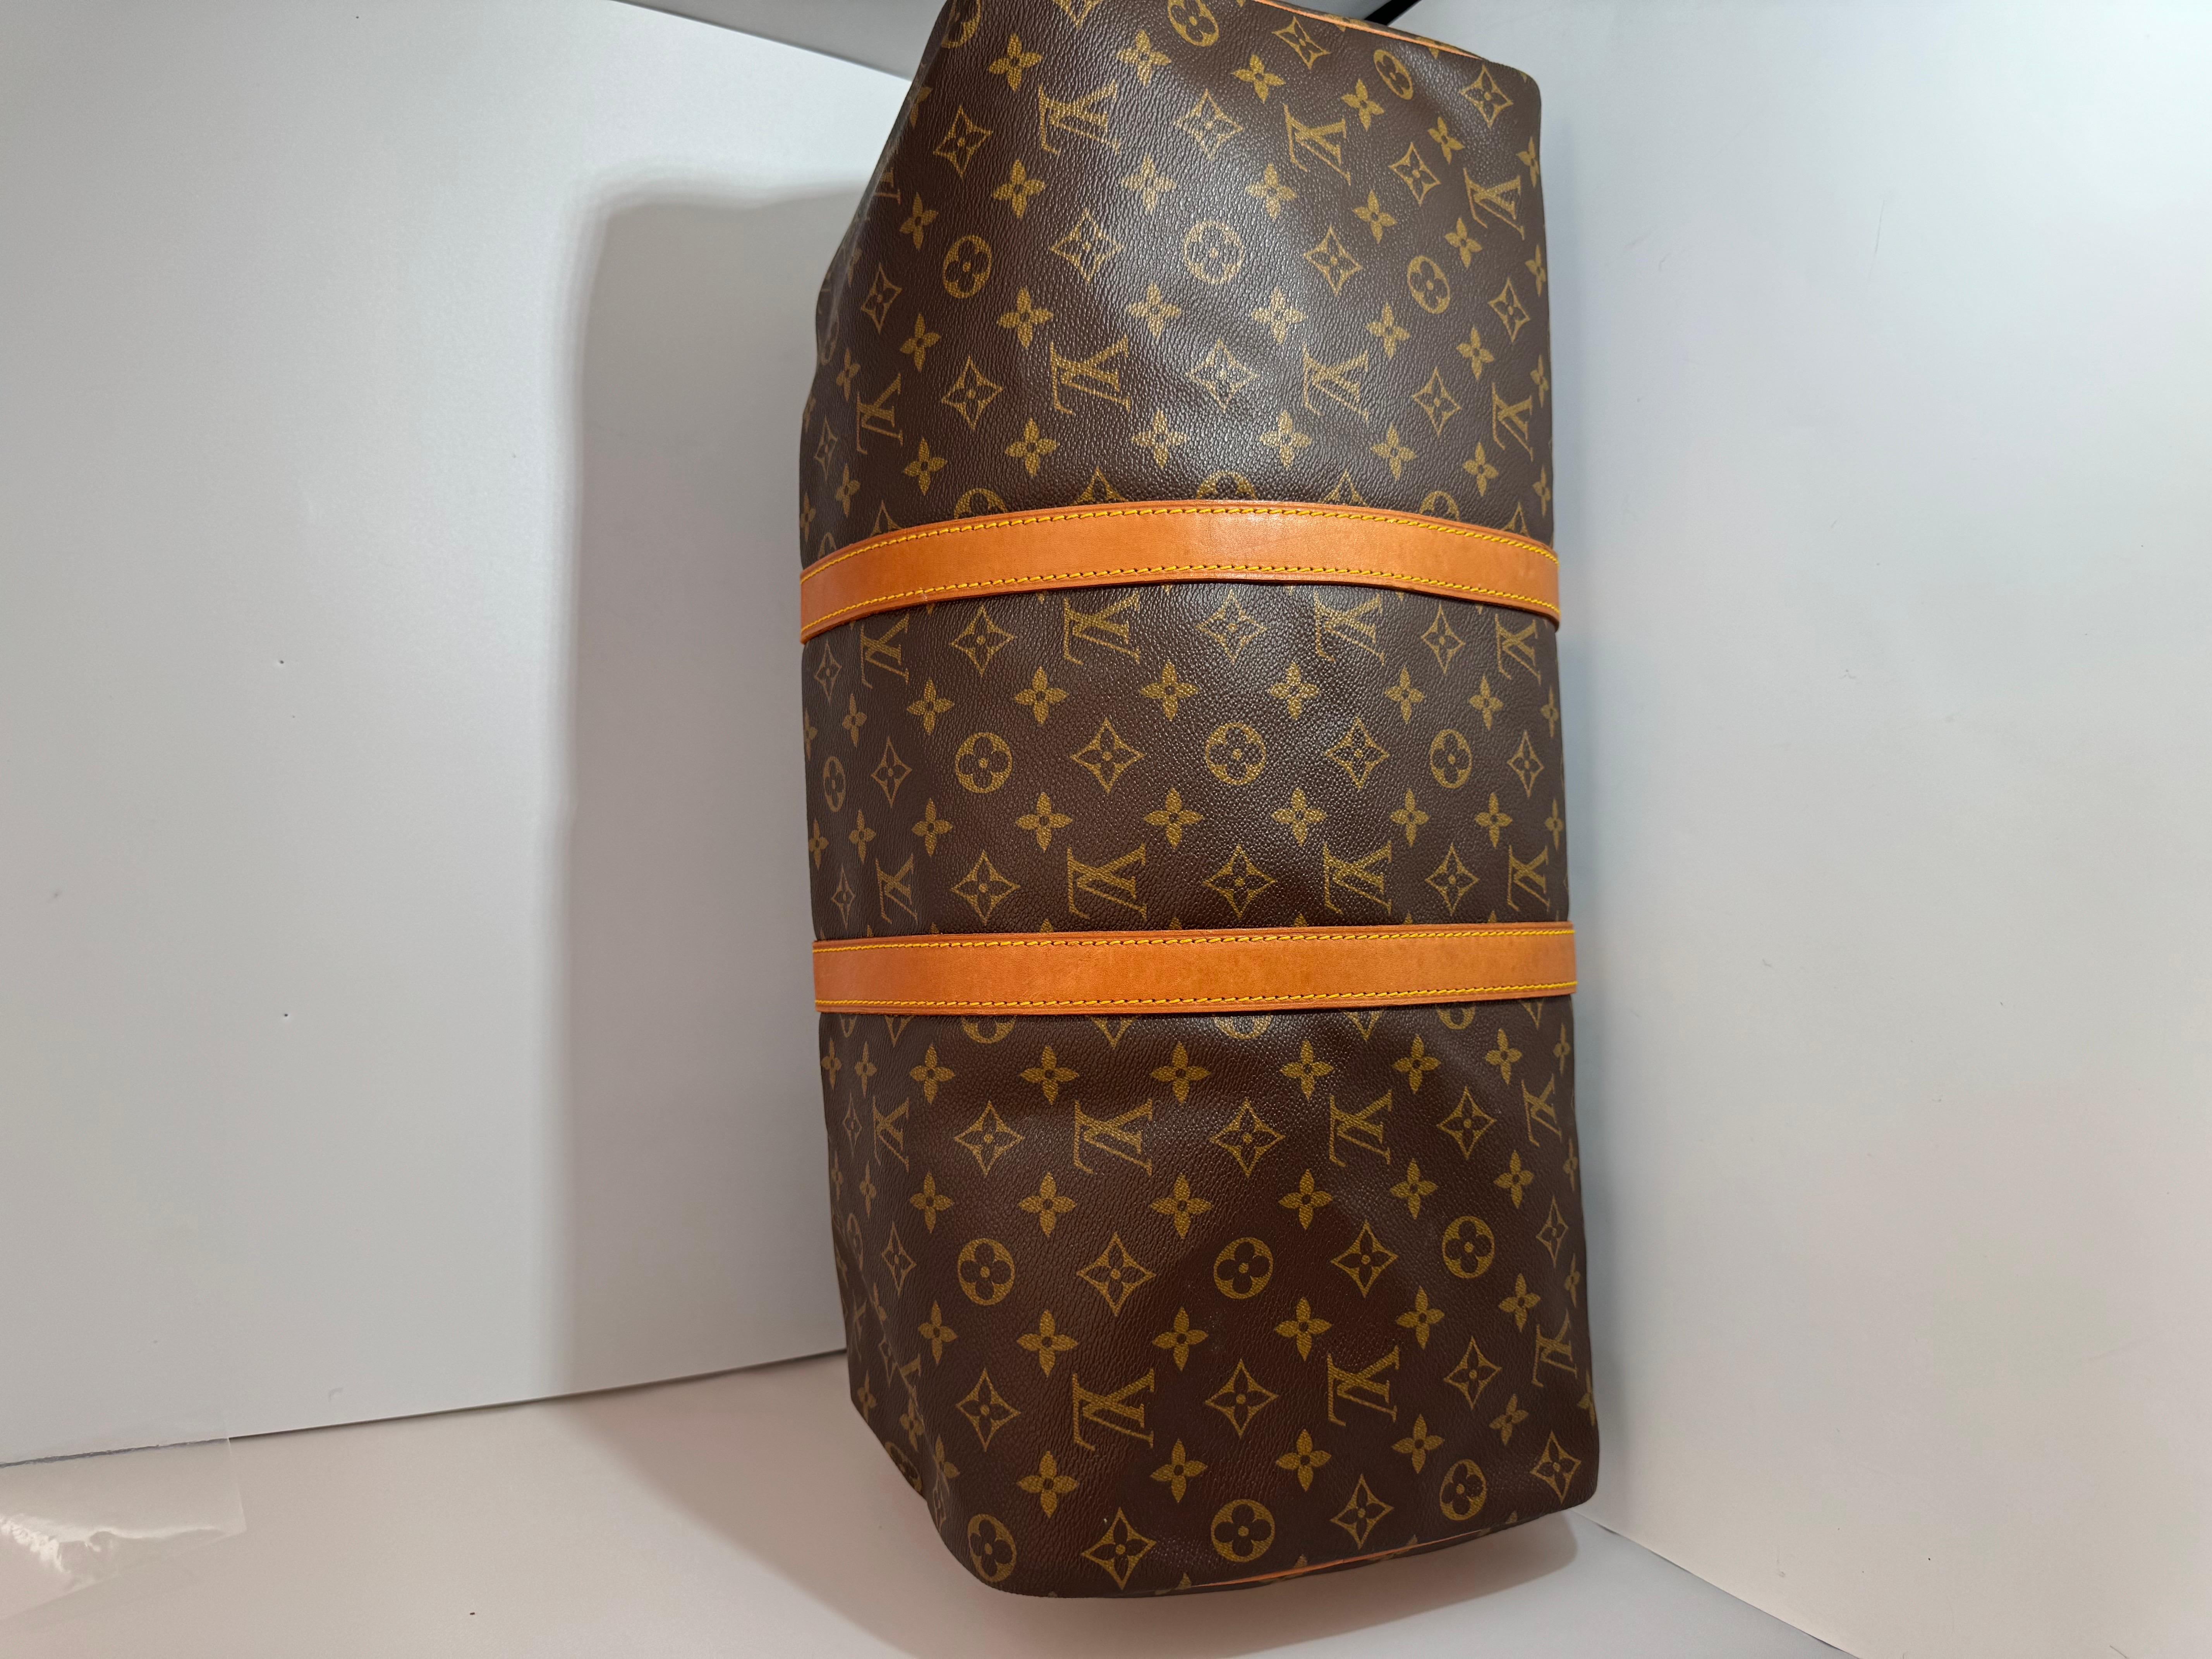 A Louis Vuitton logo-printed Louis Vuitton Keepall 50 with leather trim with bring a touch of heritage luxury wherever you carry it.
Over all  very good condition,
I have added lots of pictures of the original bag so please take a look at ball the